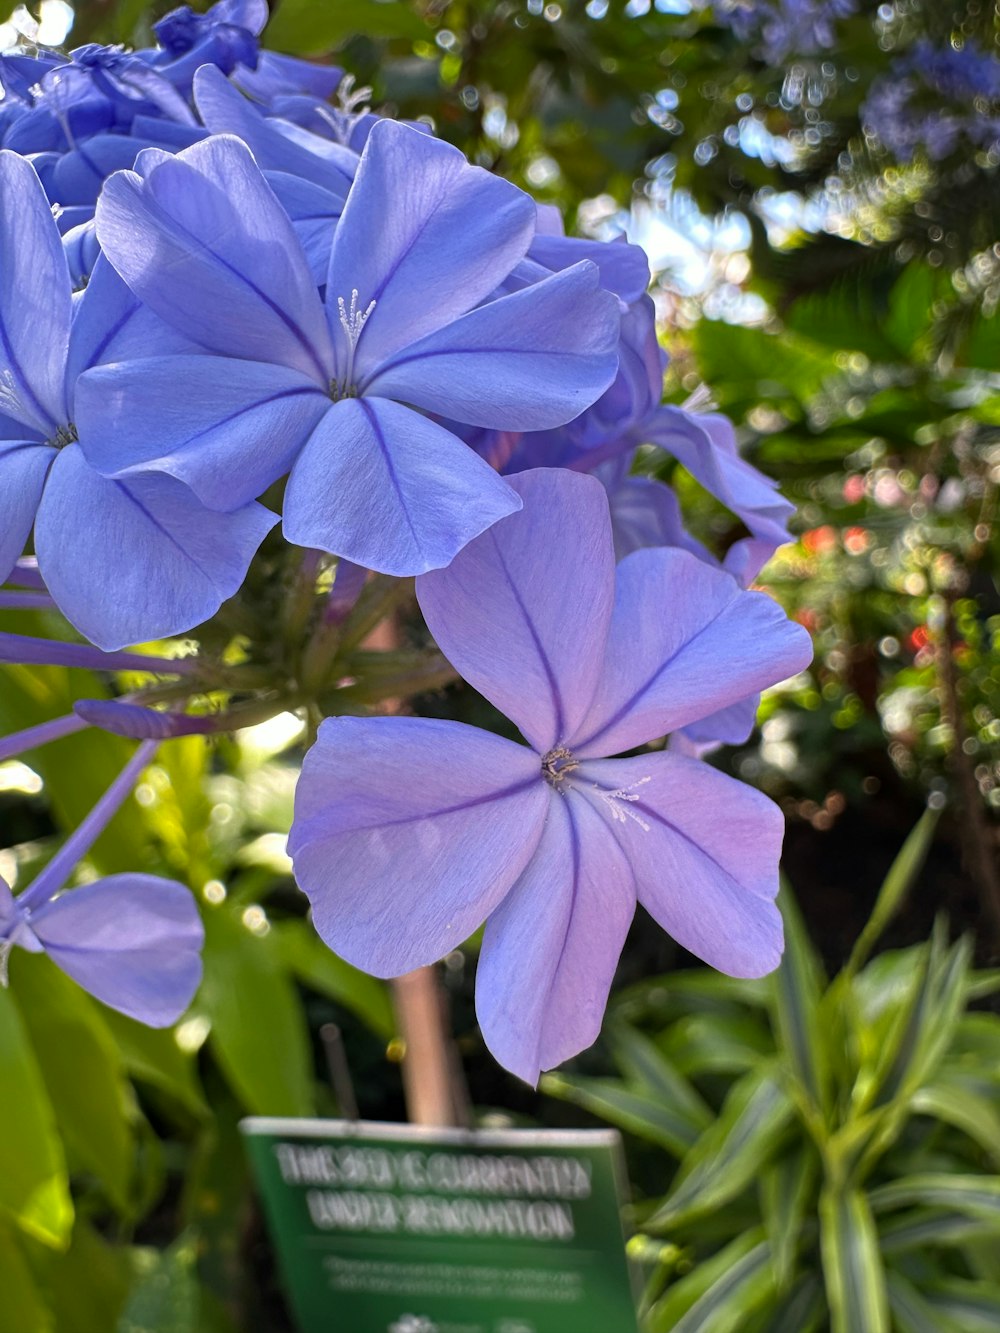 a blue flower in a garden with a sign in the foreground